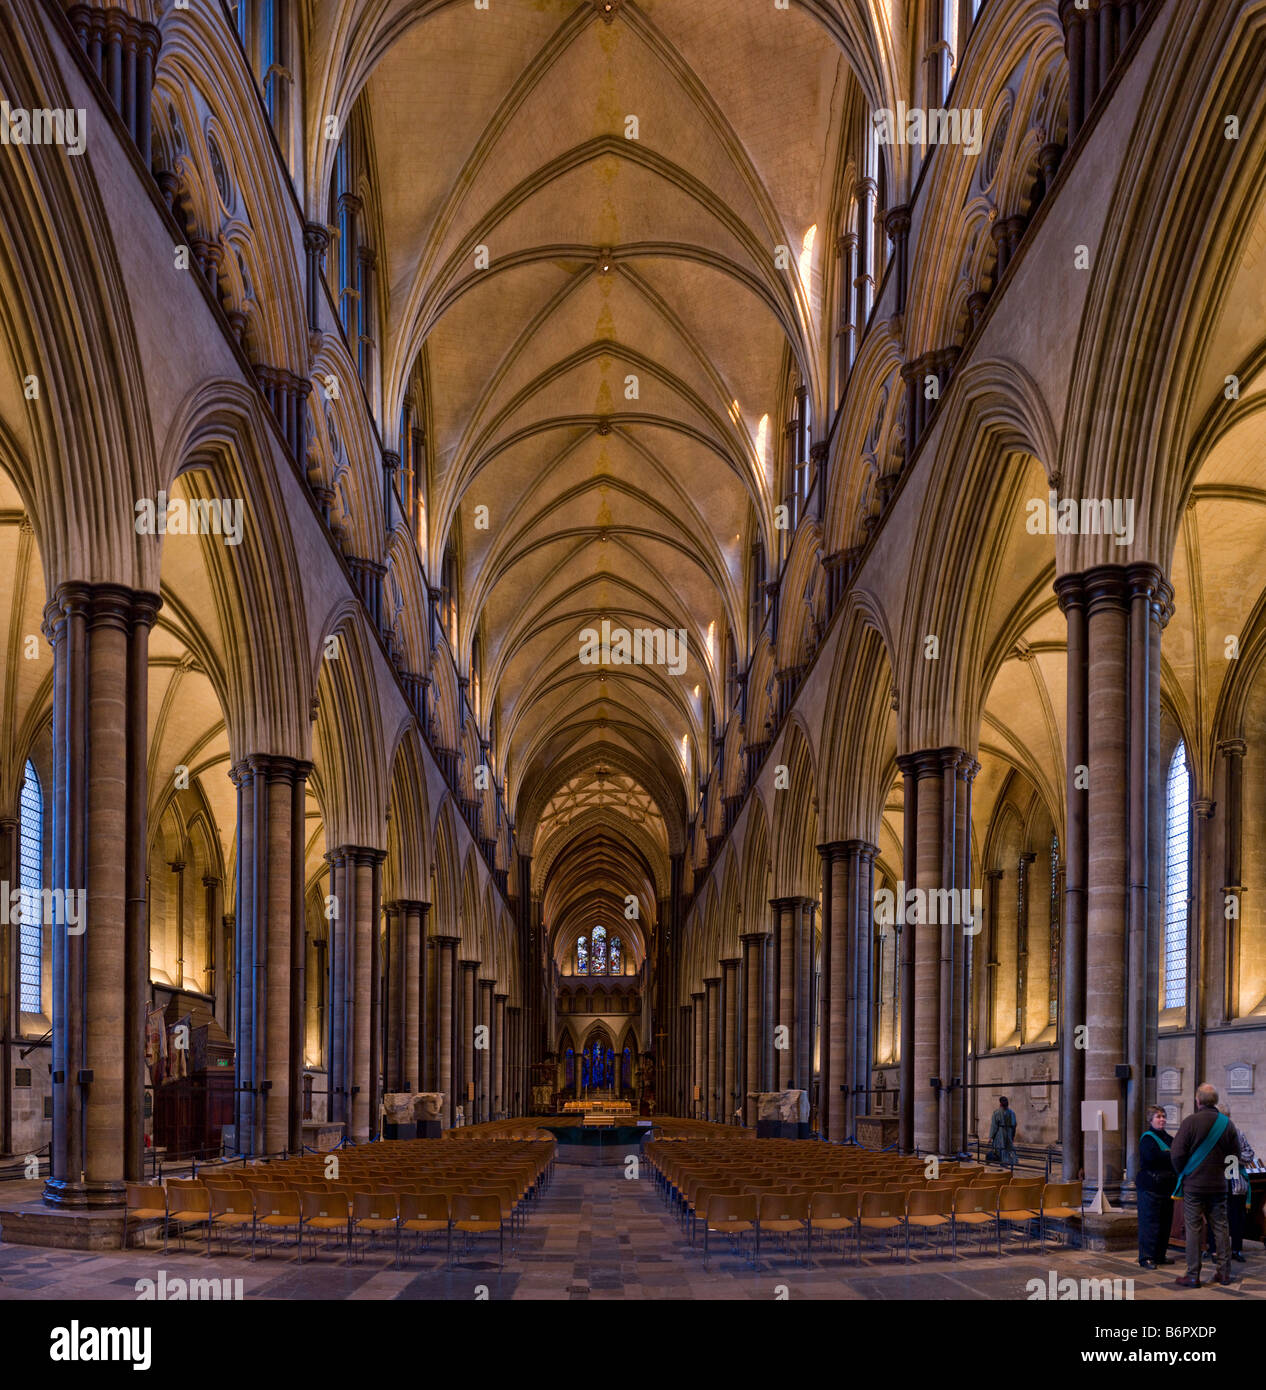 Salisbury Cathedral interior Picture by Andrew Hasson December 5th 2008 Stock Photo